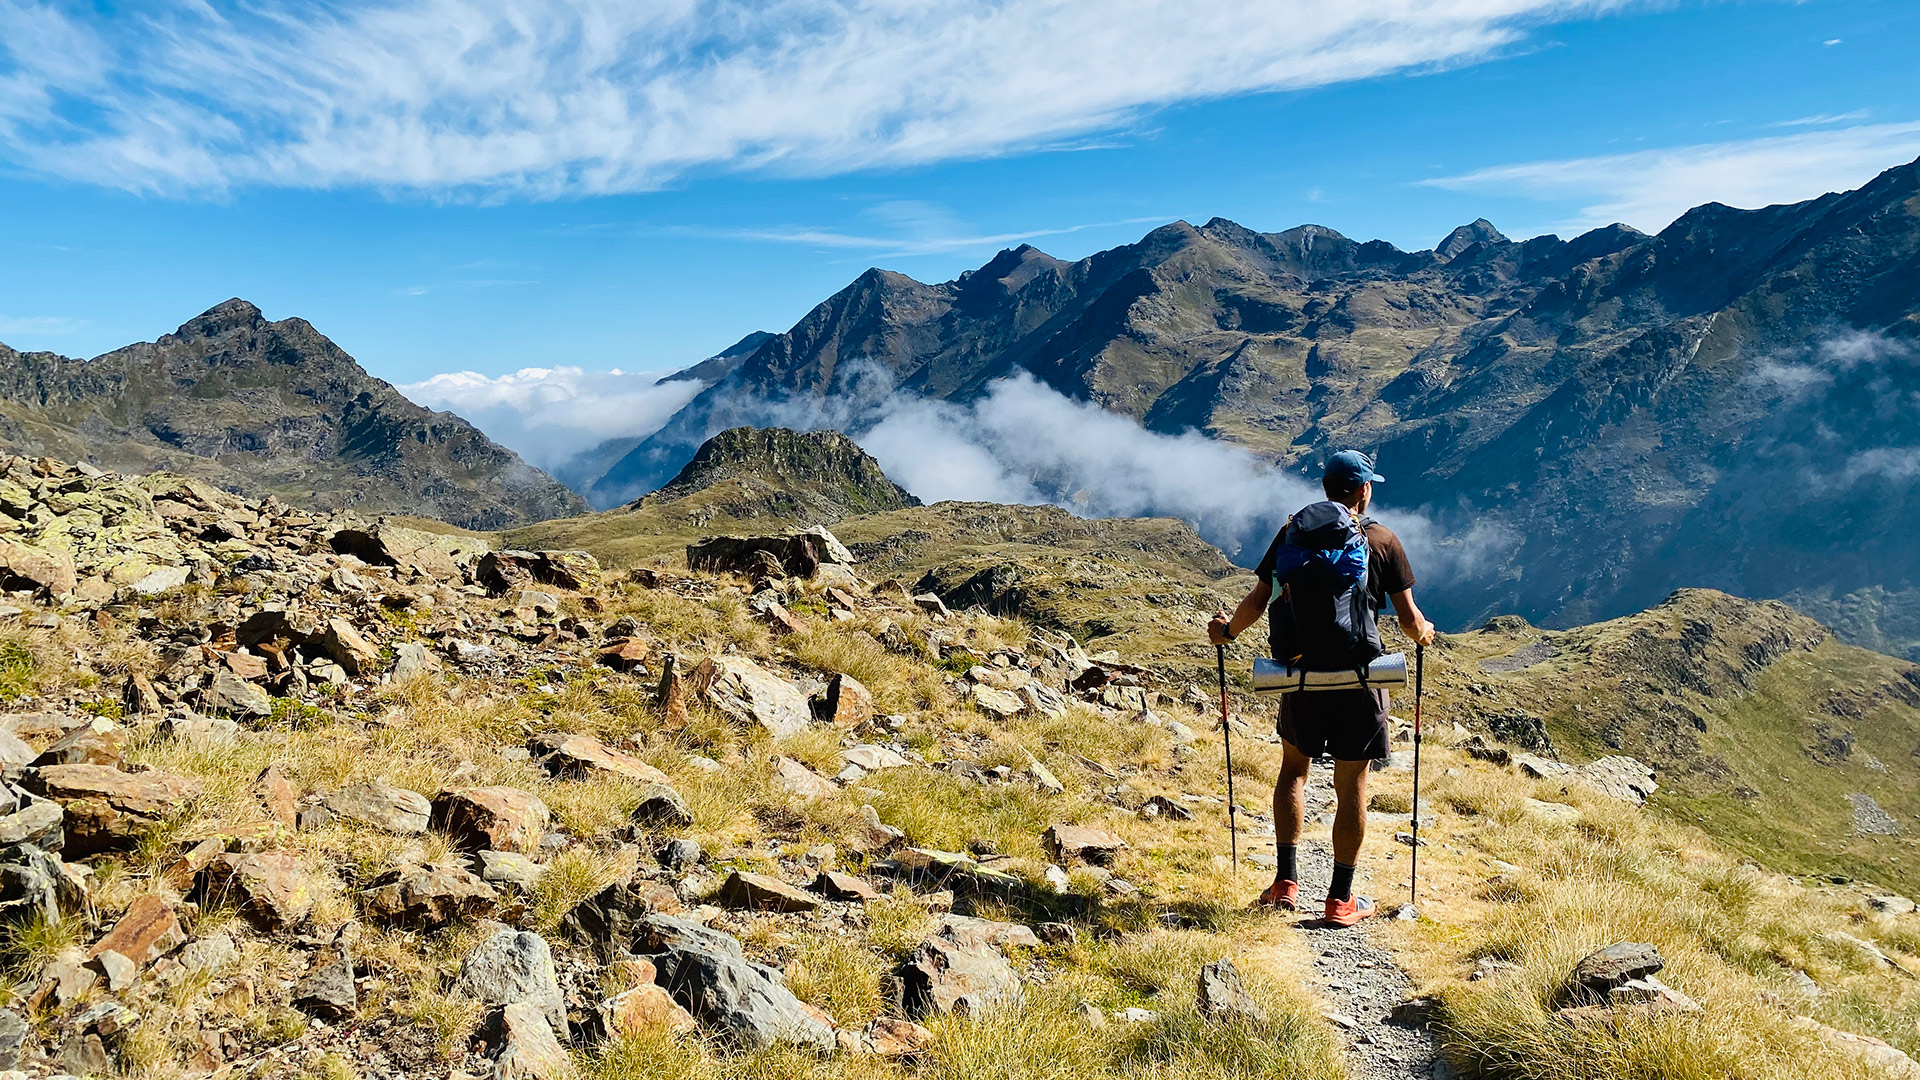 Man hiking the Haute Route Pyrenees, looking out over the mountains